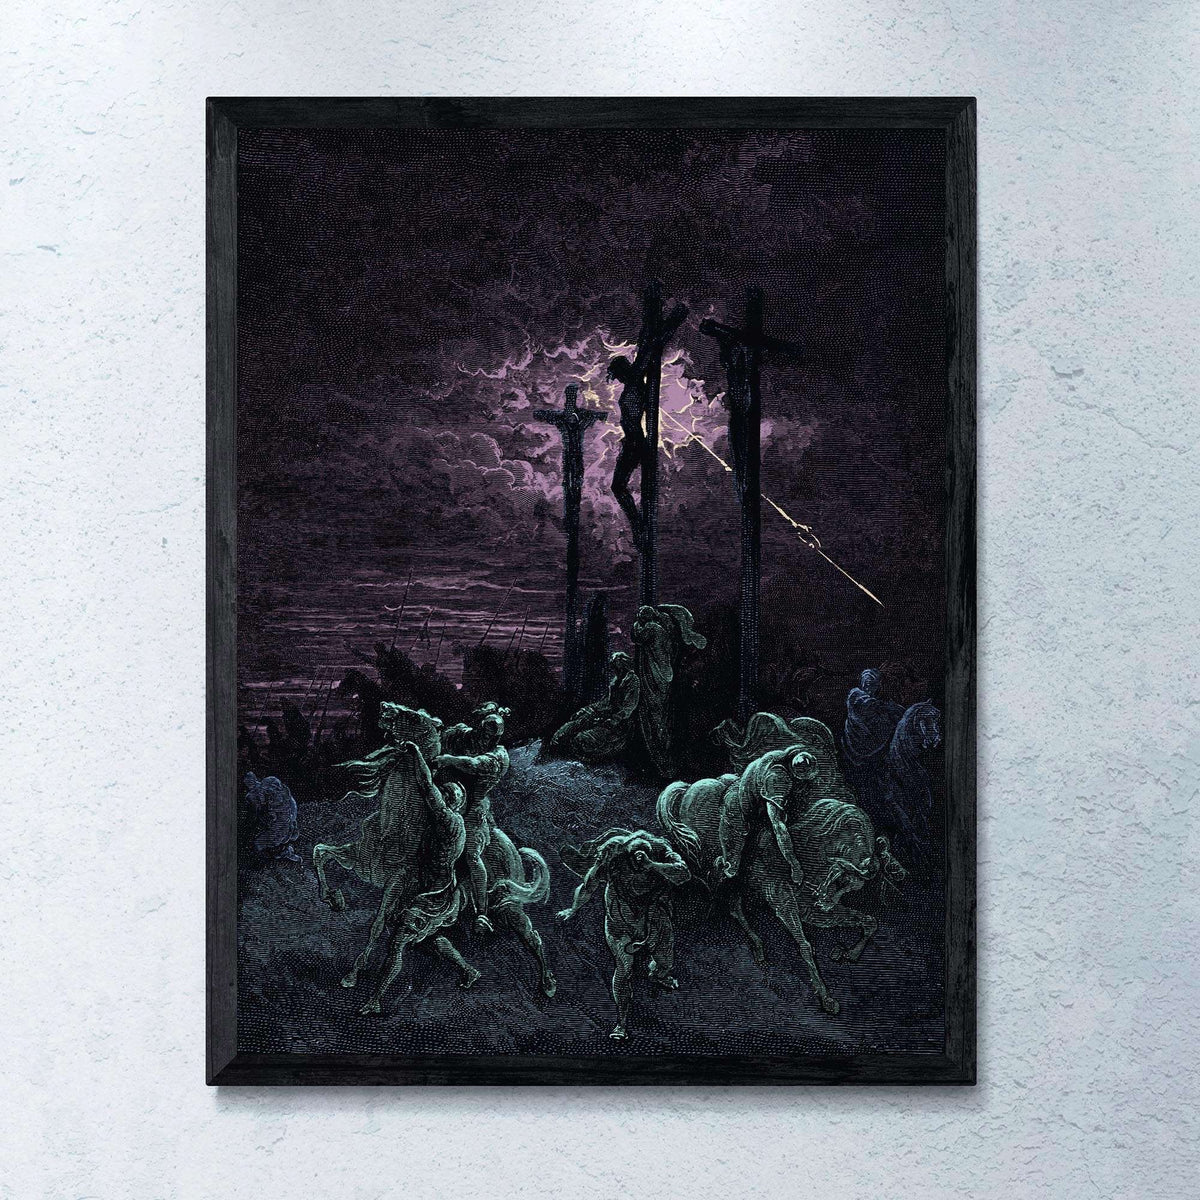 Darkness at the Crucifixion | Gustave Dore Paradise Lost, Dante | Surreal Full Color Eerie Christ Fine Art Print - Sacred Surreal